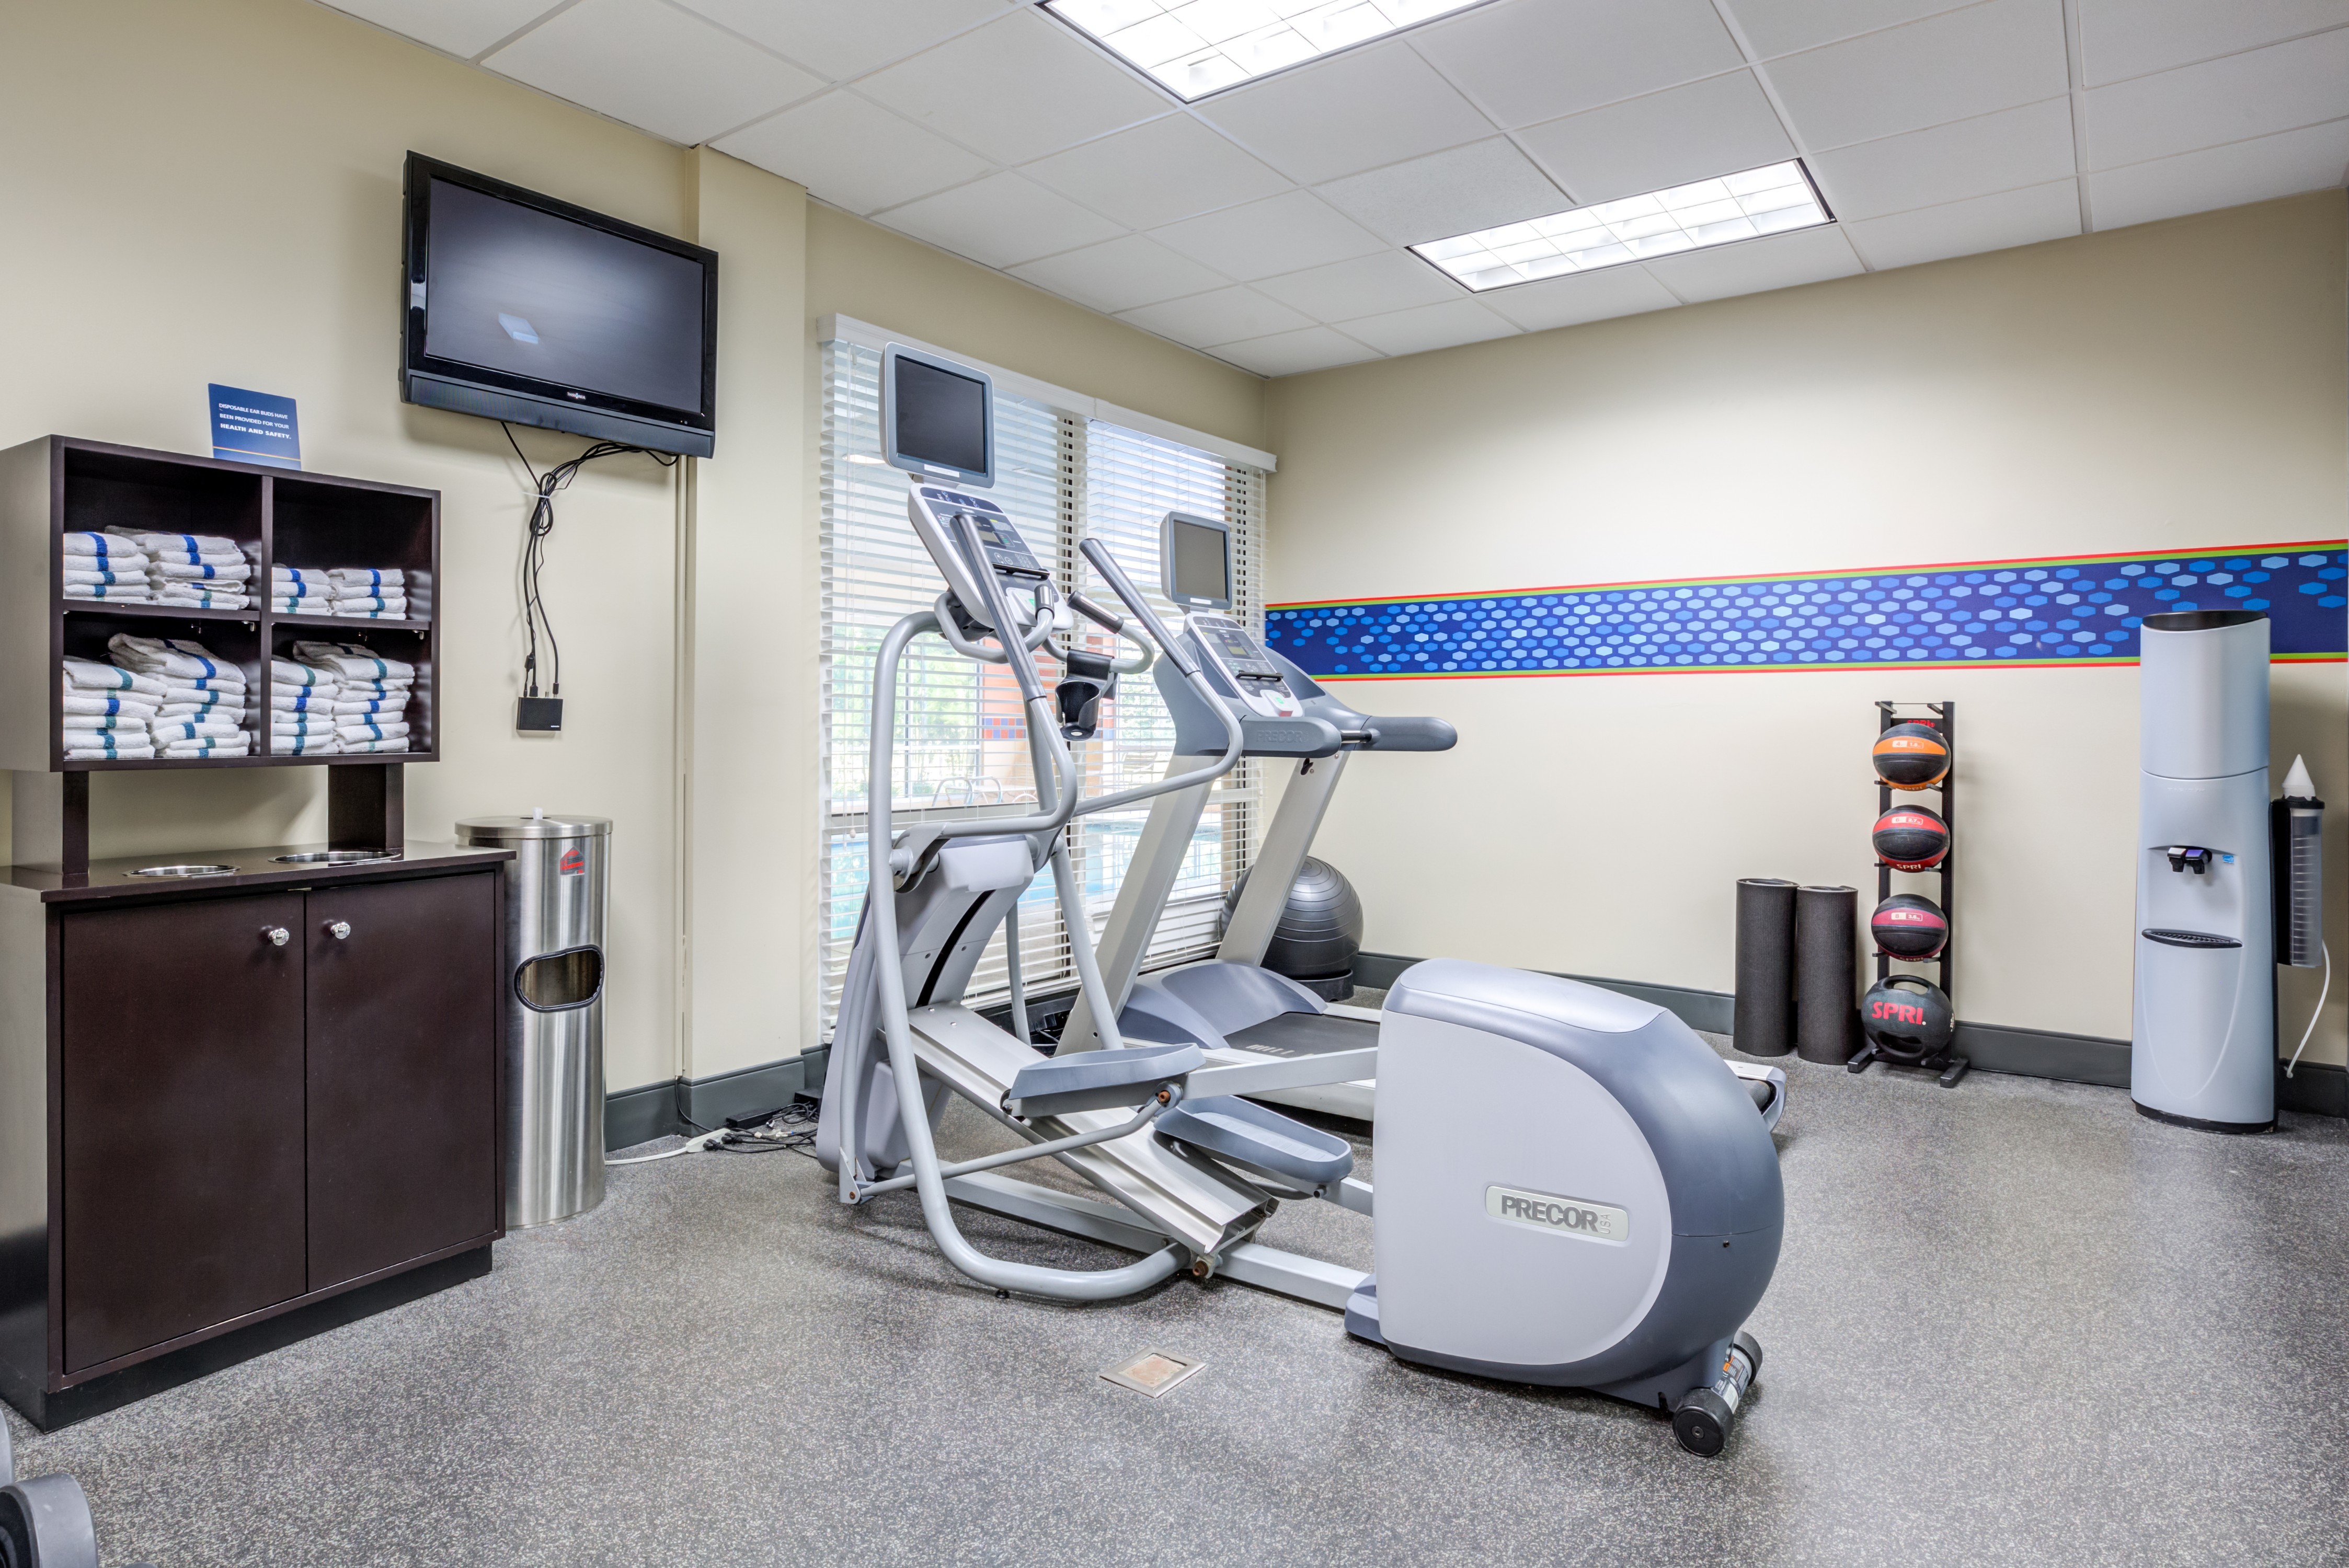 Fitness Center with Exercise Equipment, Towels and a Wall Mounted TV